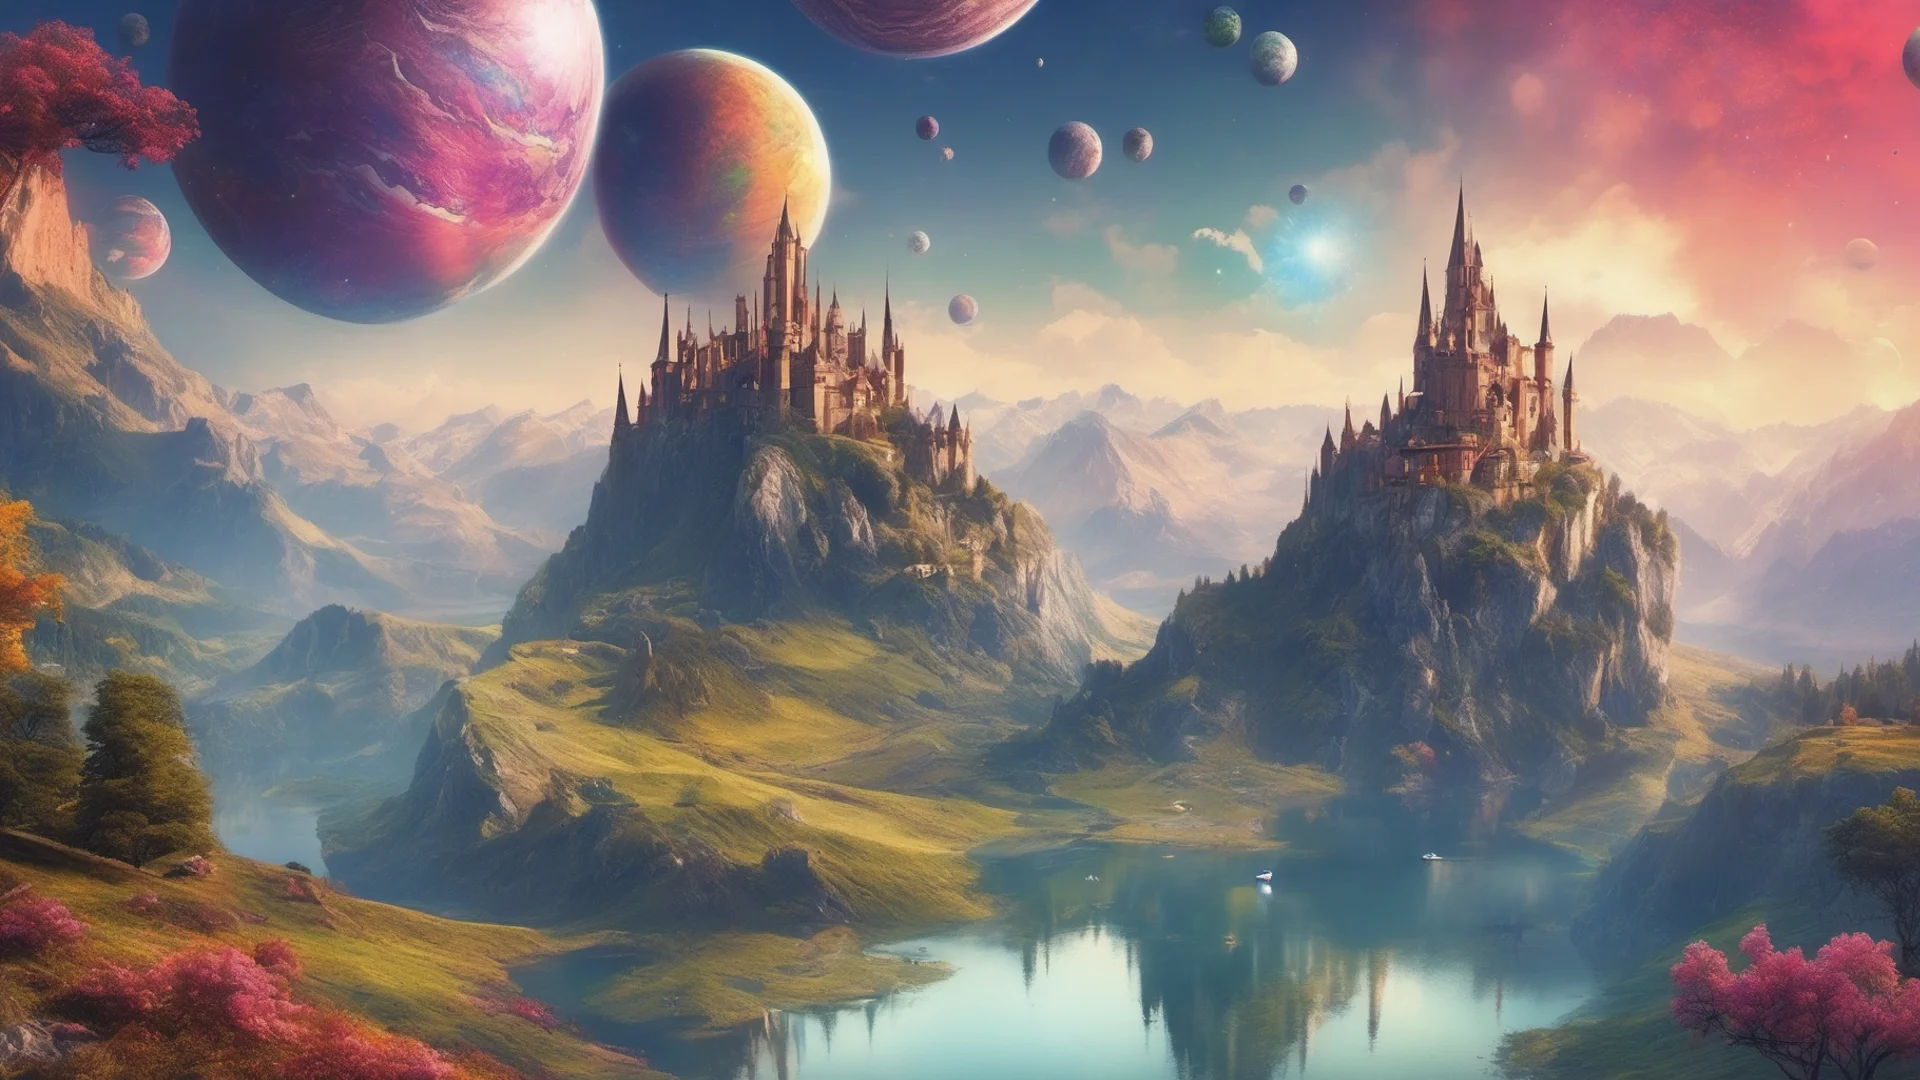 beautiful environment castle on mountains with lakes colorful planets wide